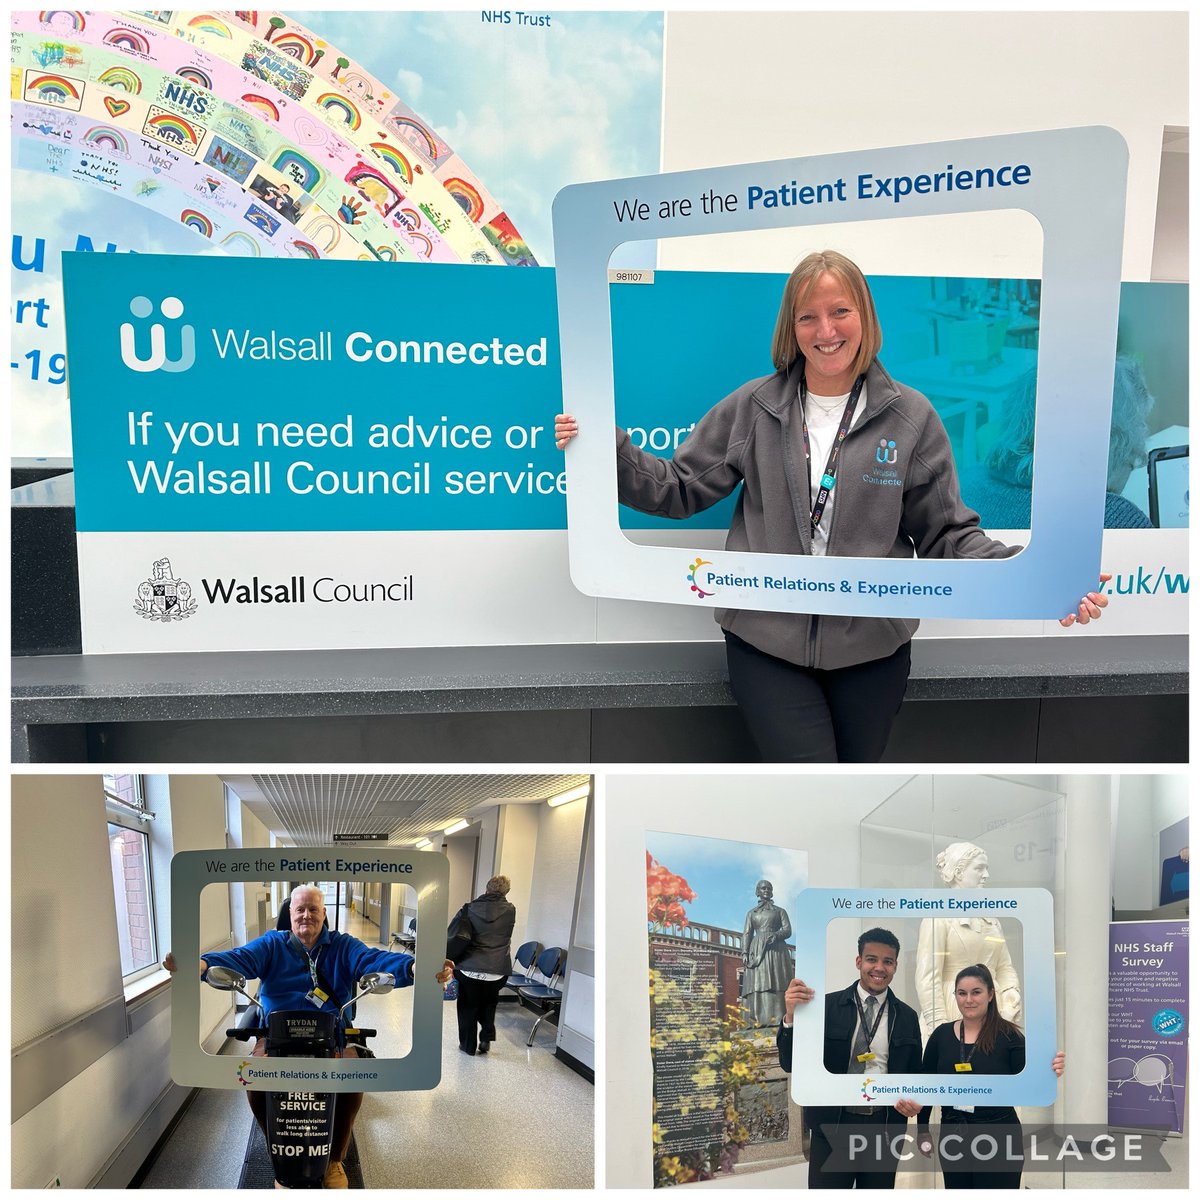 Shout out to our amazing Walsall Connected Team, PALS Team and Volunteer Scooter Drivers! Thank you for keeping our patients connected, supported, and heard. You make a difference everyday! @G12PRY @AndyR1ce @LisaRuthCarroll @whytecm #PEW2024 #PXWeek #PatExp